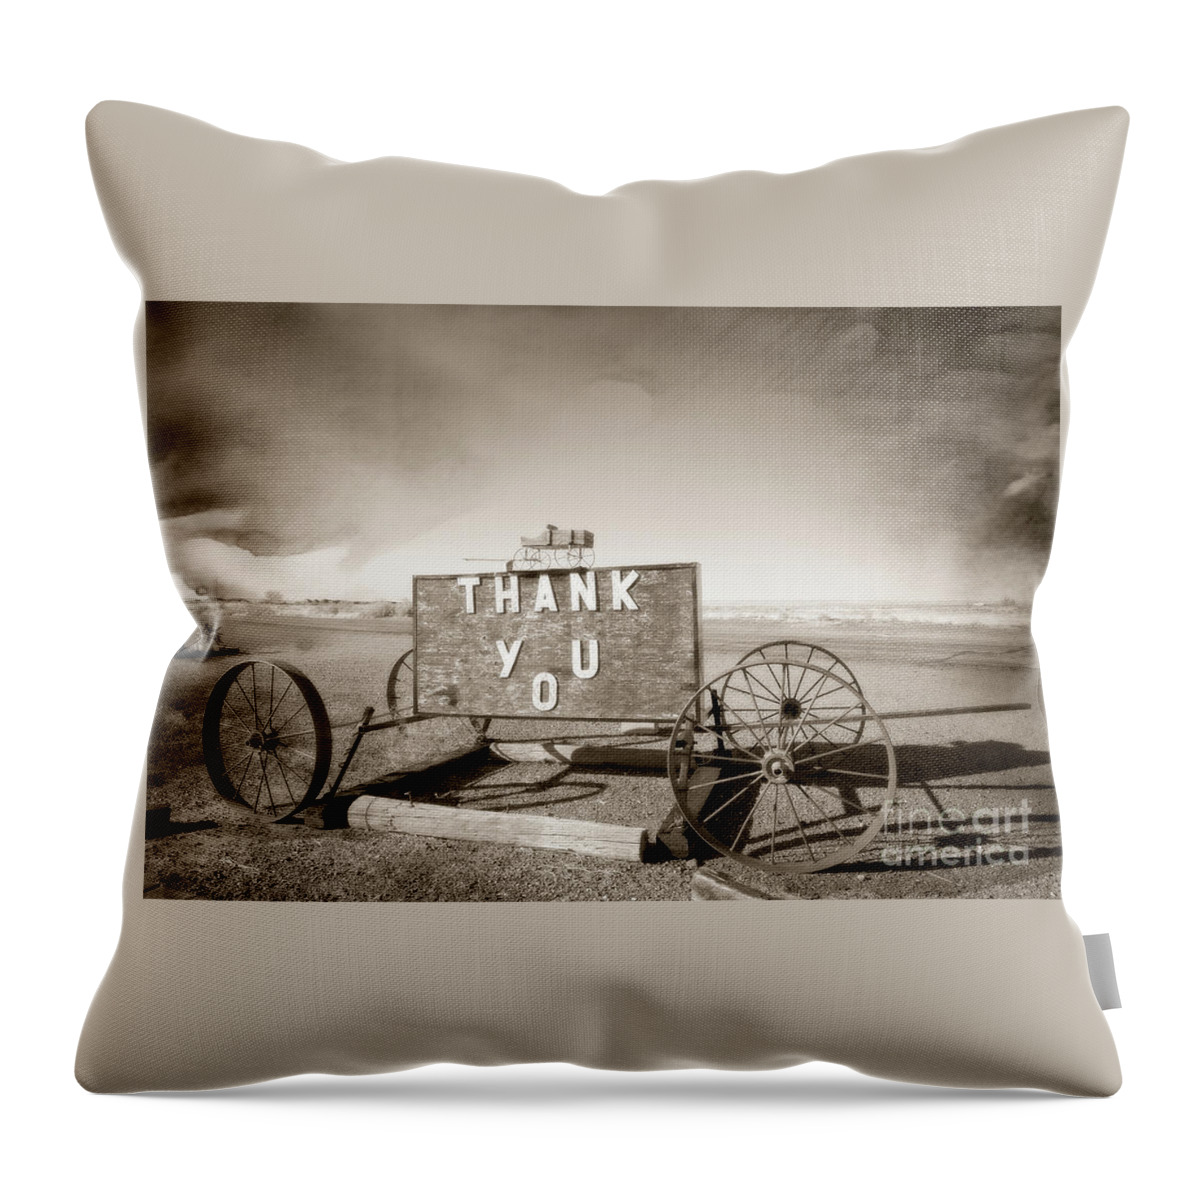 Thank You Wagon Throw Pillow featuring the photograph Thank You Wagon by Imagery by Charly